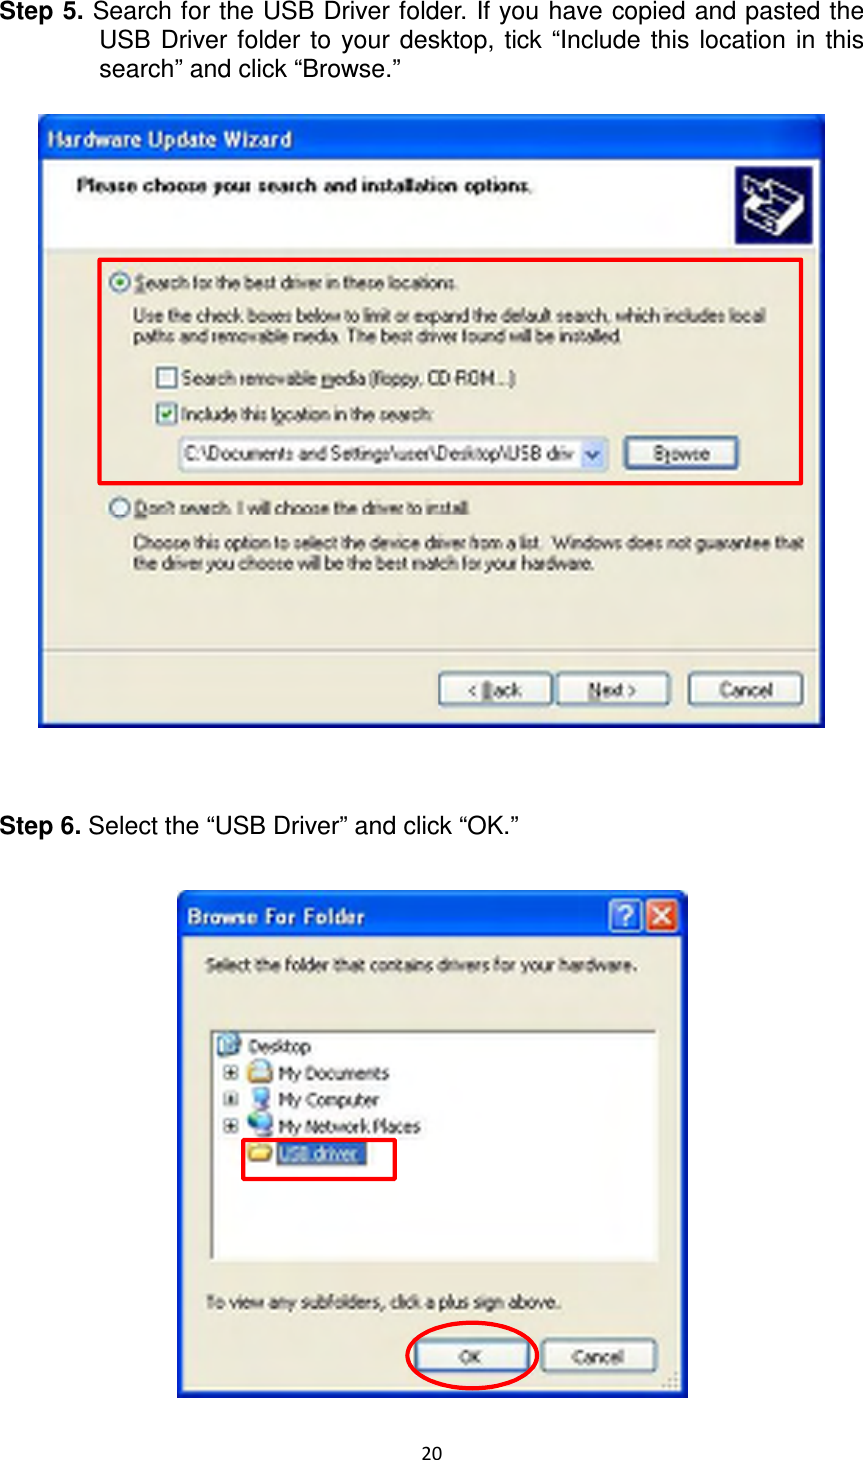 20  Step 5. Search for the USB Driver folder. If you have copied and pasted the USB  Driver  folder  to  your  desktop,  tick  “Include  this  location  in  this search” and click “Browse.”   Step 6. Select the “USB Driver” and click “OK.”    